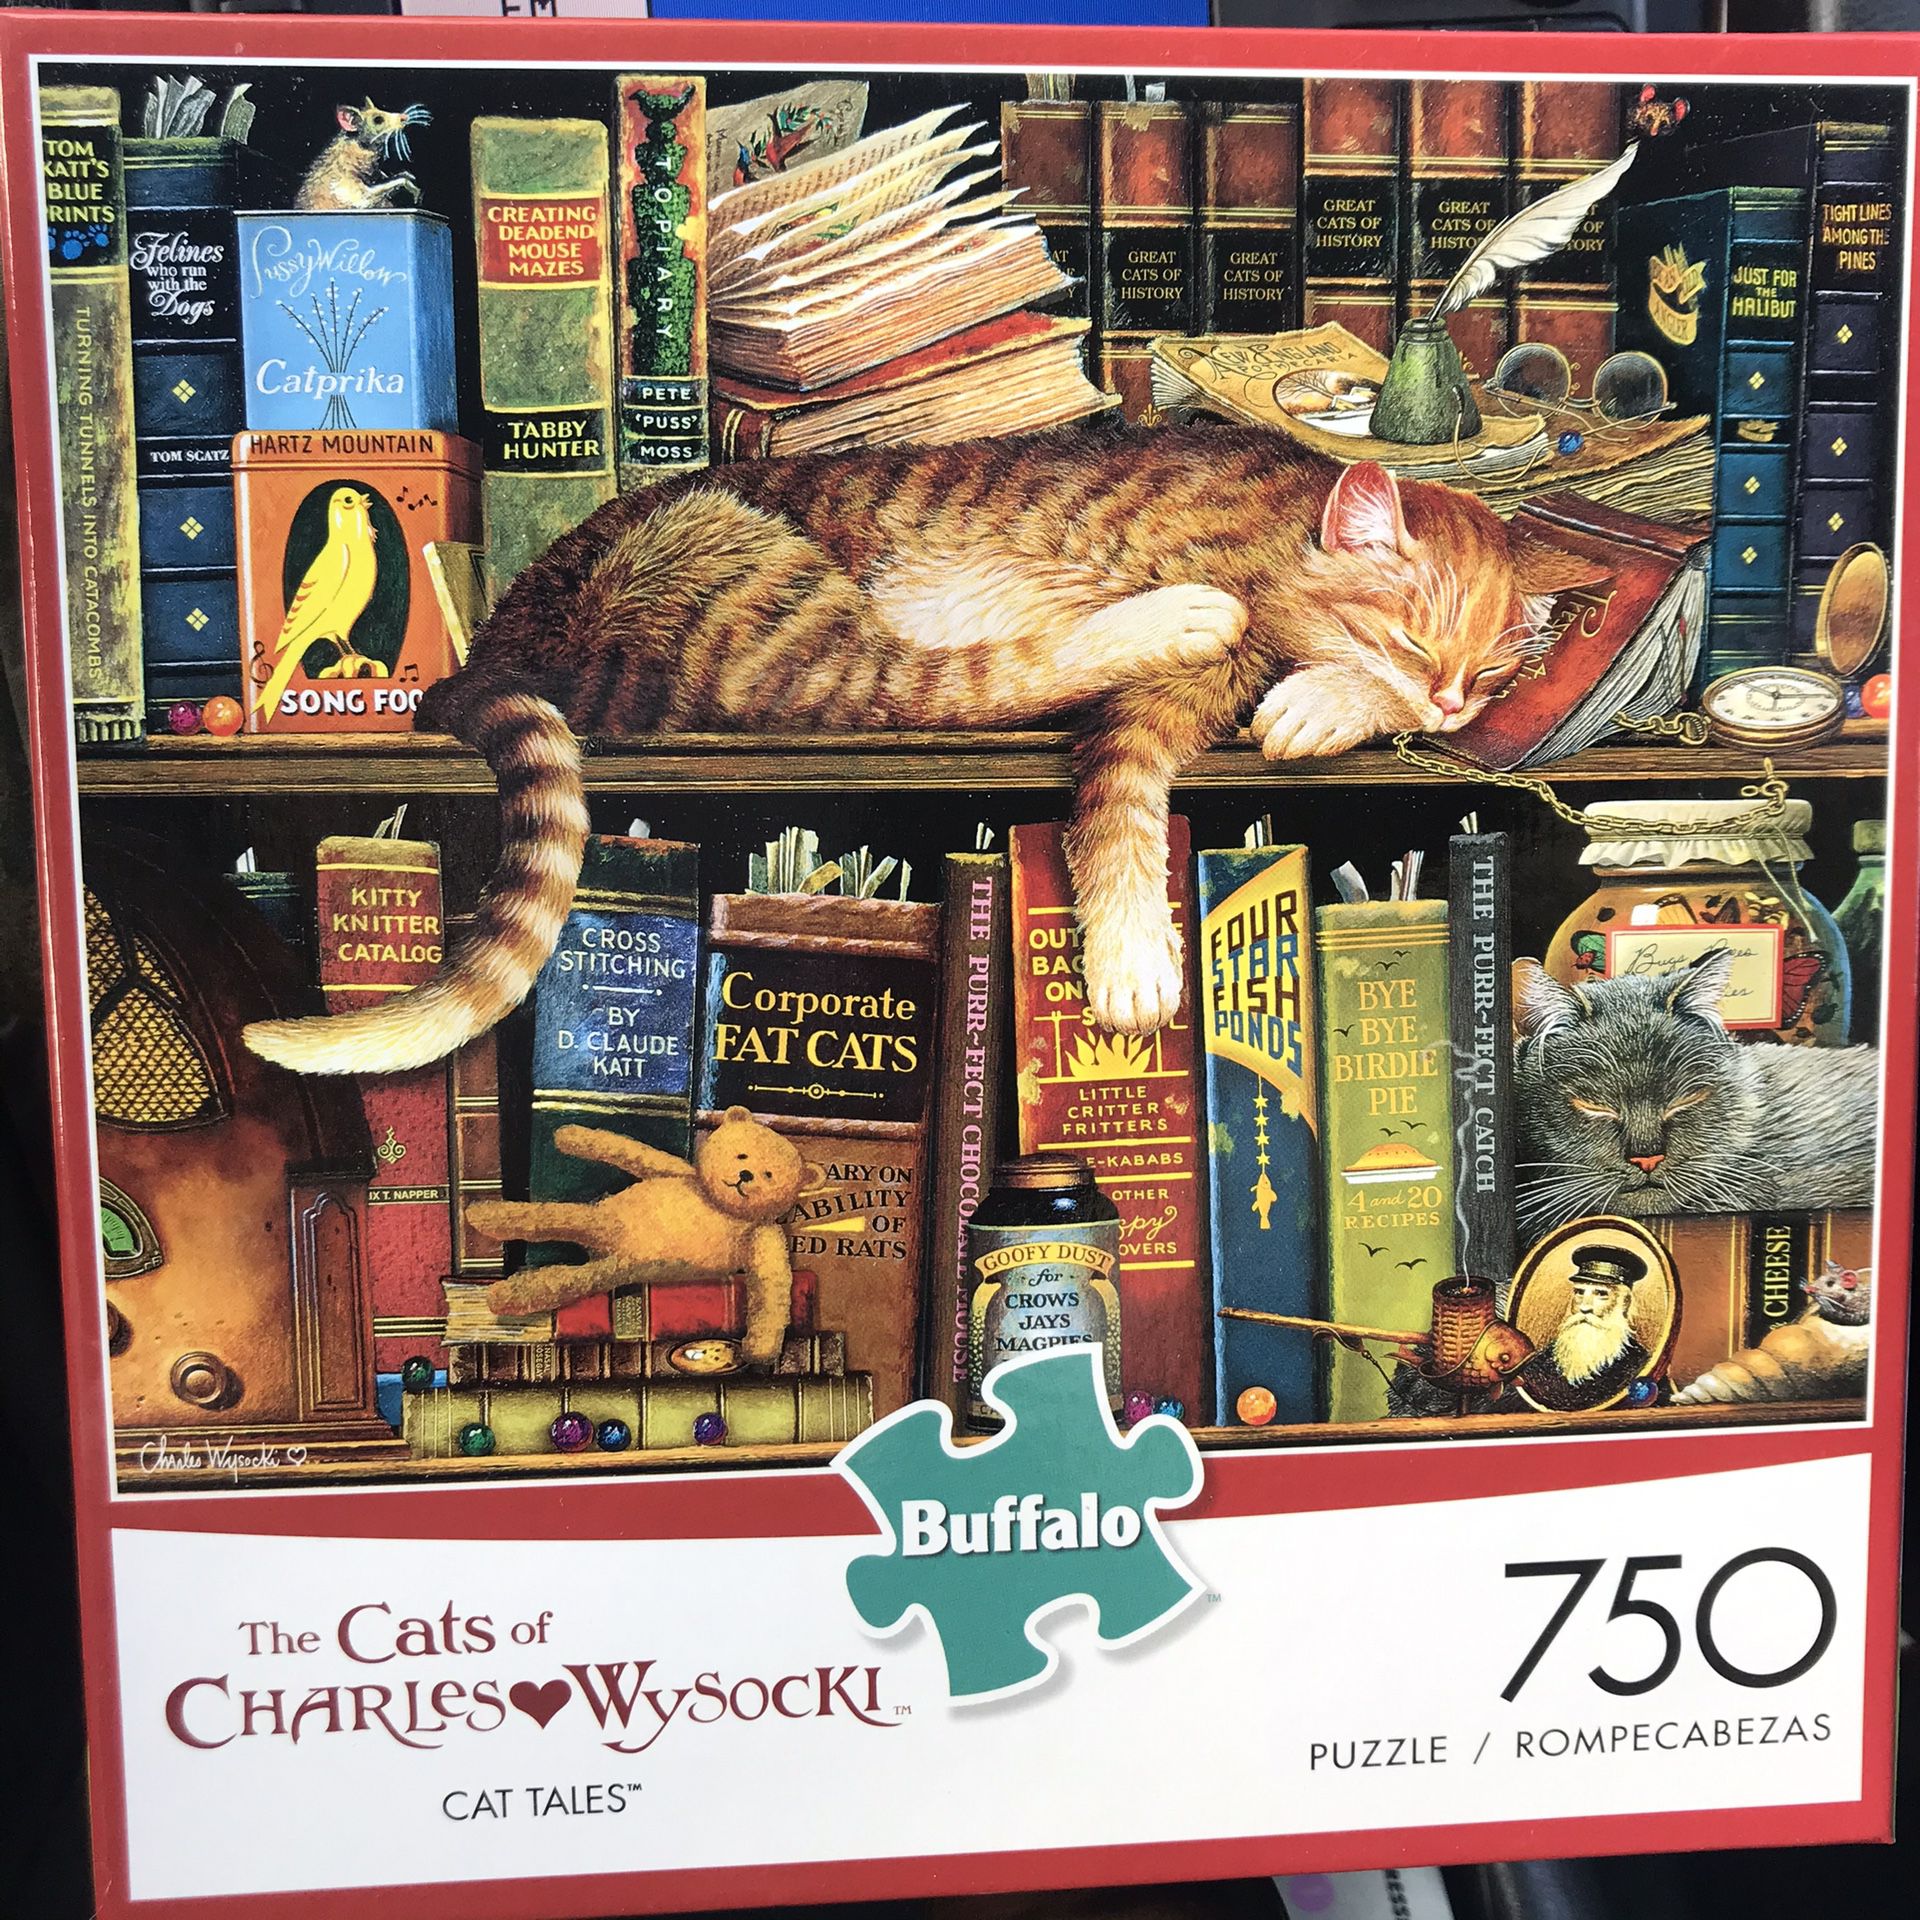 NEW!!! 750 Piece Puzzle CATS OF CHARLES WYSOCKI “CAT TALES”